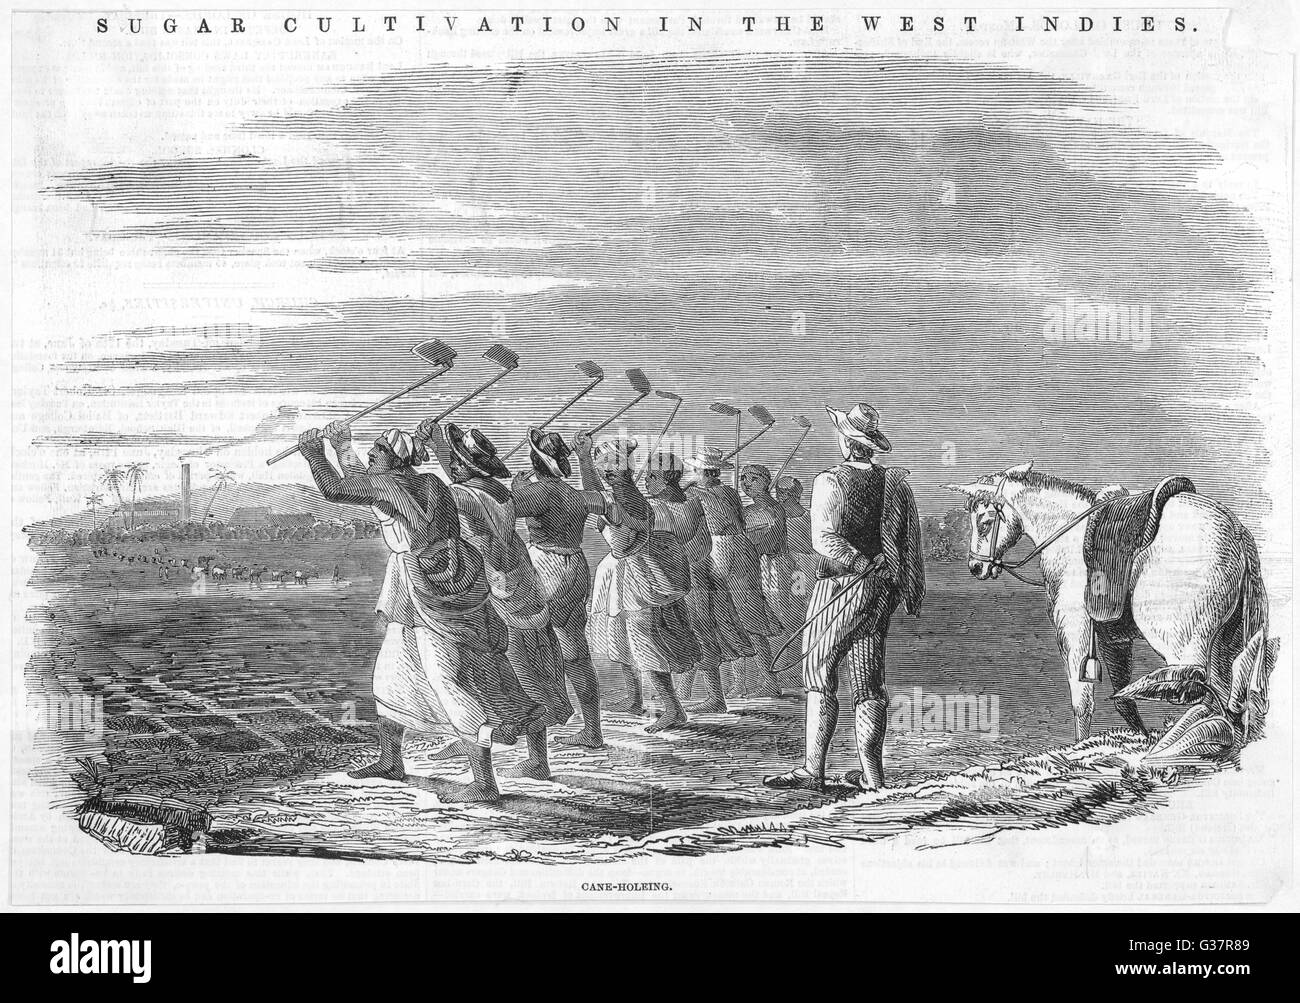 A work gang prepare ground for the planting of sugar cane, hoeing deep holes of about two square feet, in the centre of which the canes will be planted.         Date: 1849 Stock Photo